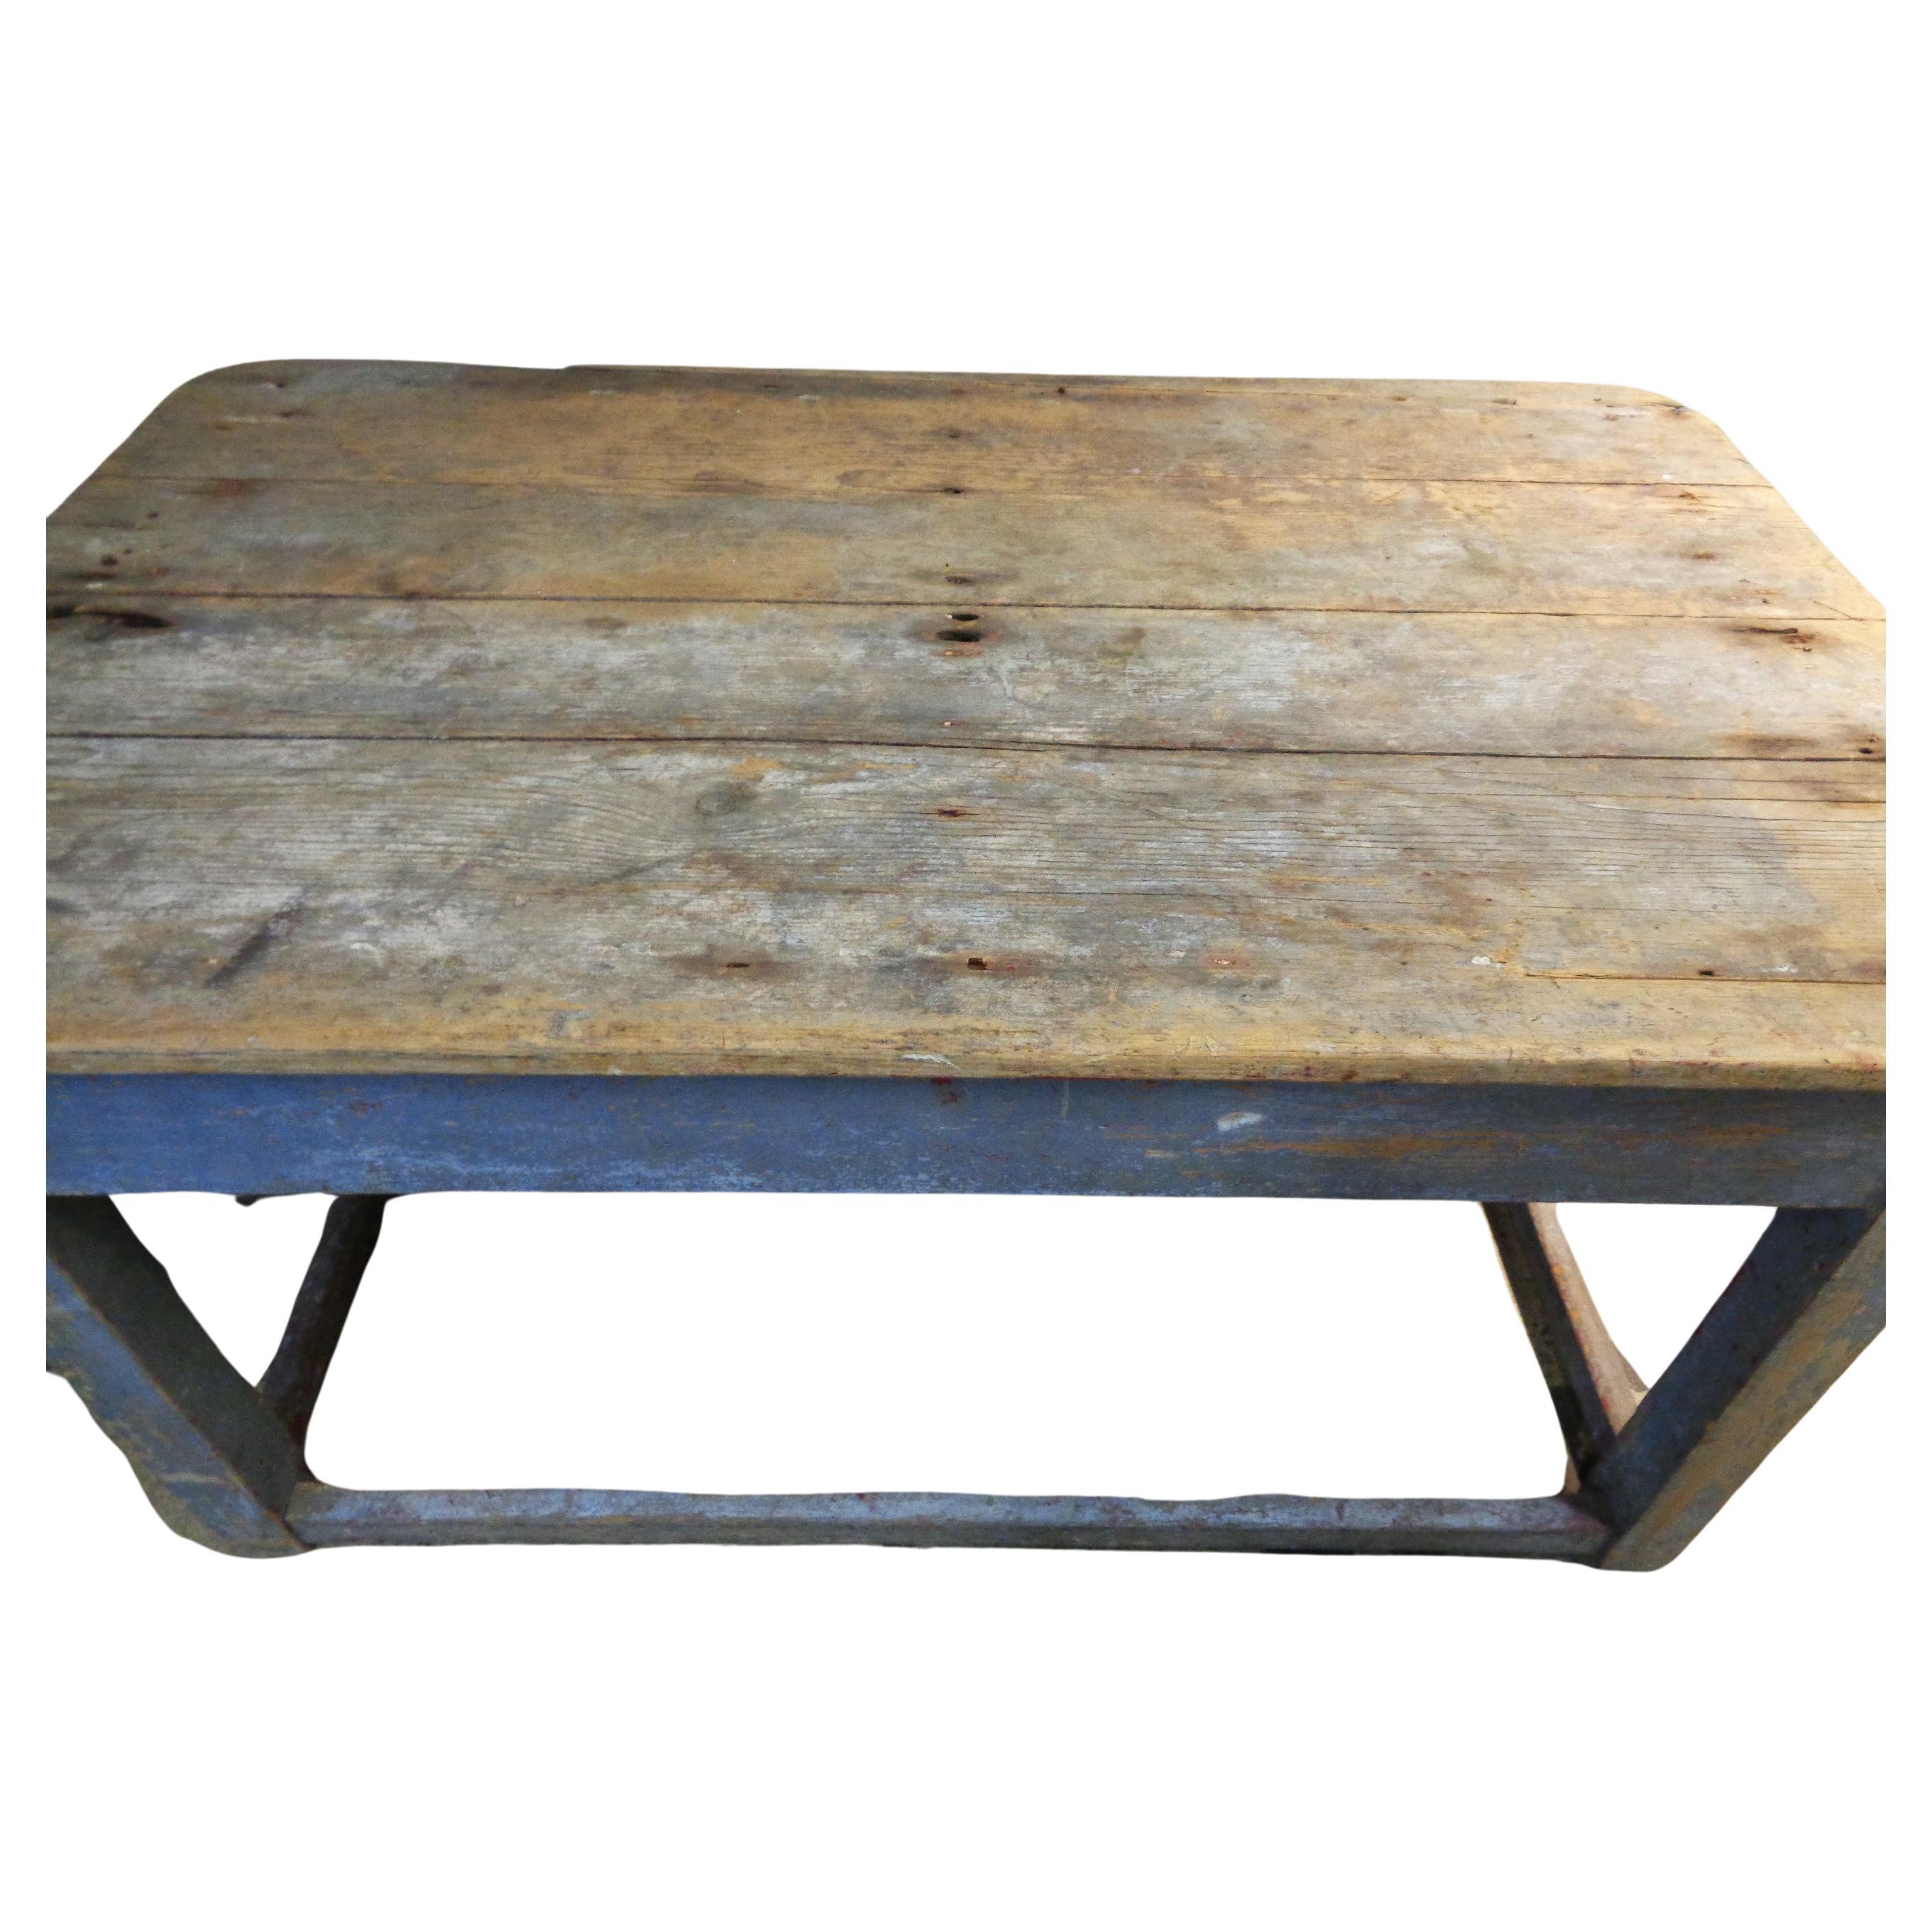  Early 19th Century Original Blue Painted Rustic Work Table  For Sale 3